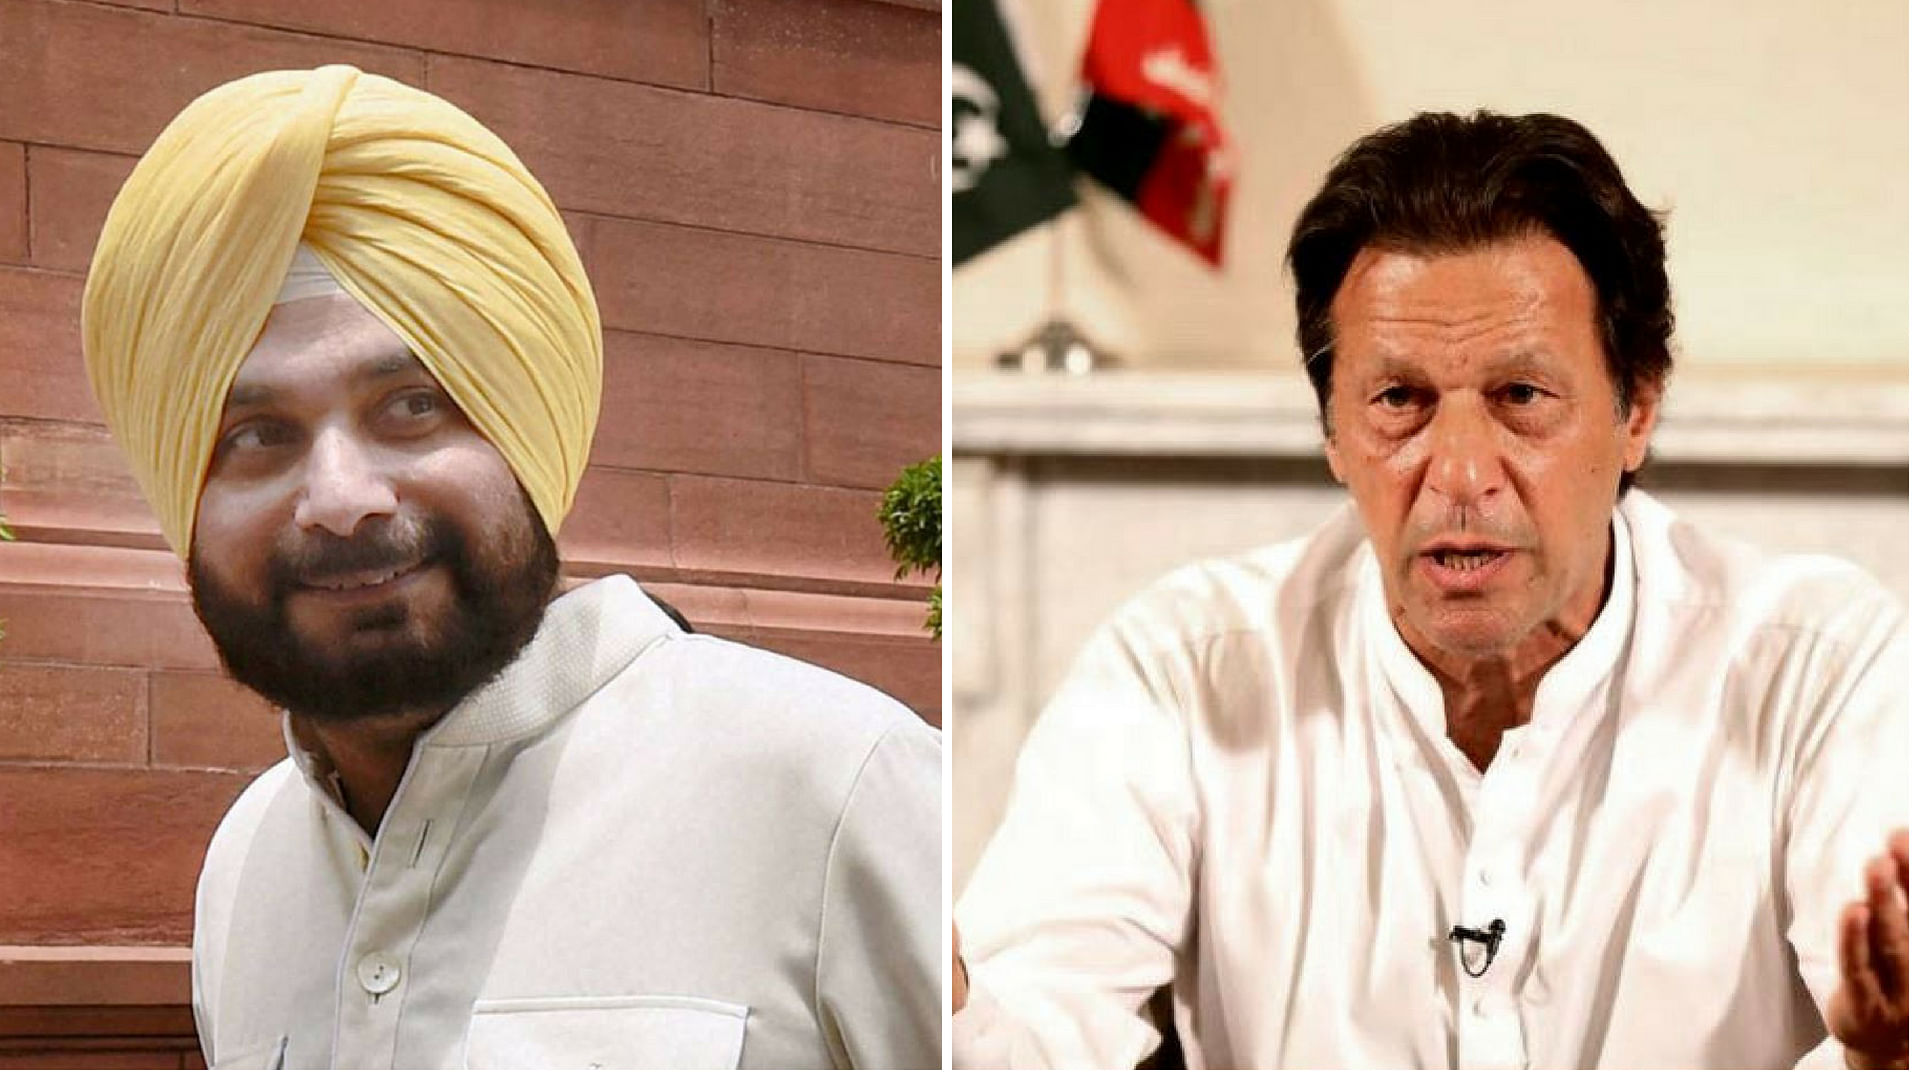 Navjot Singh Sidhu attended the swearing-in ceremony of Pakistan’s new Primer Minister Imran Khan.